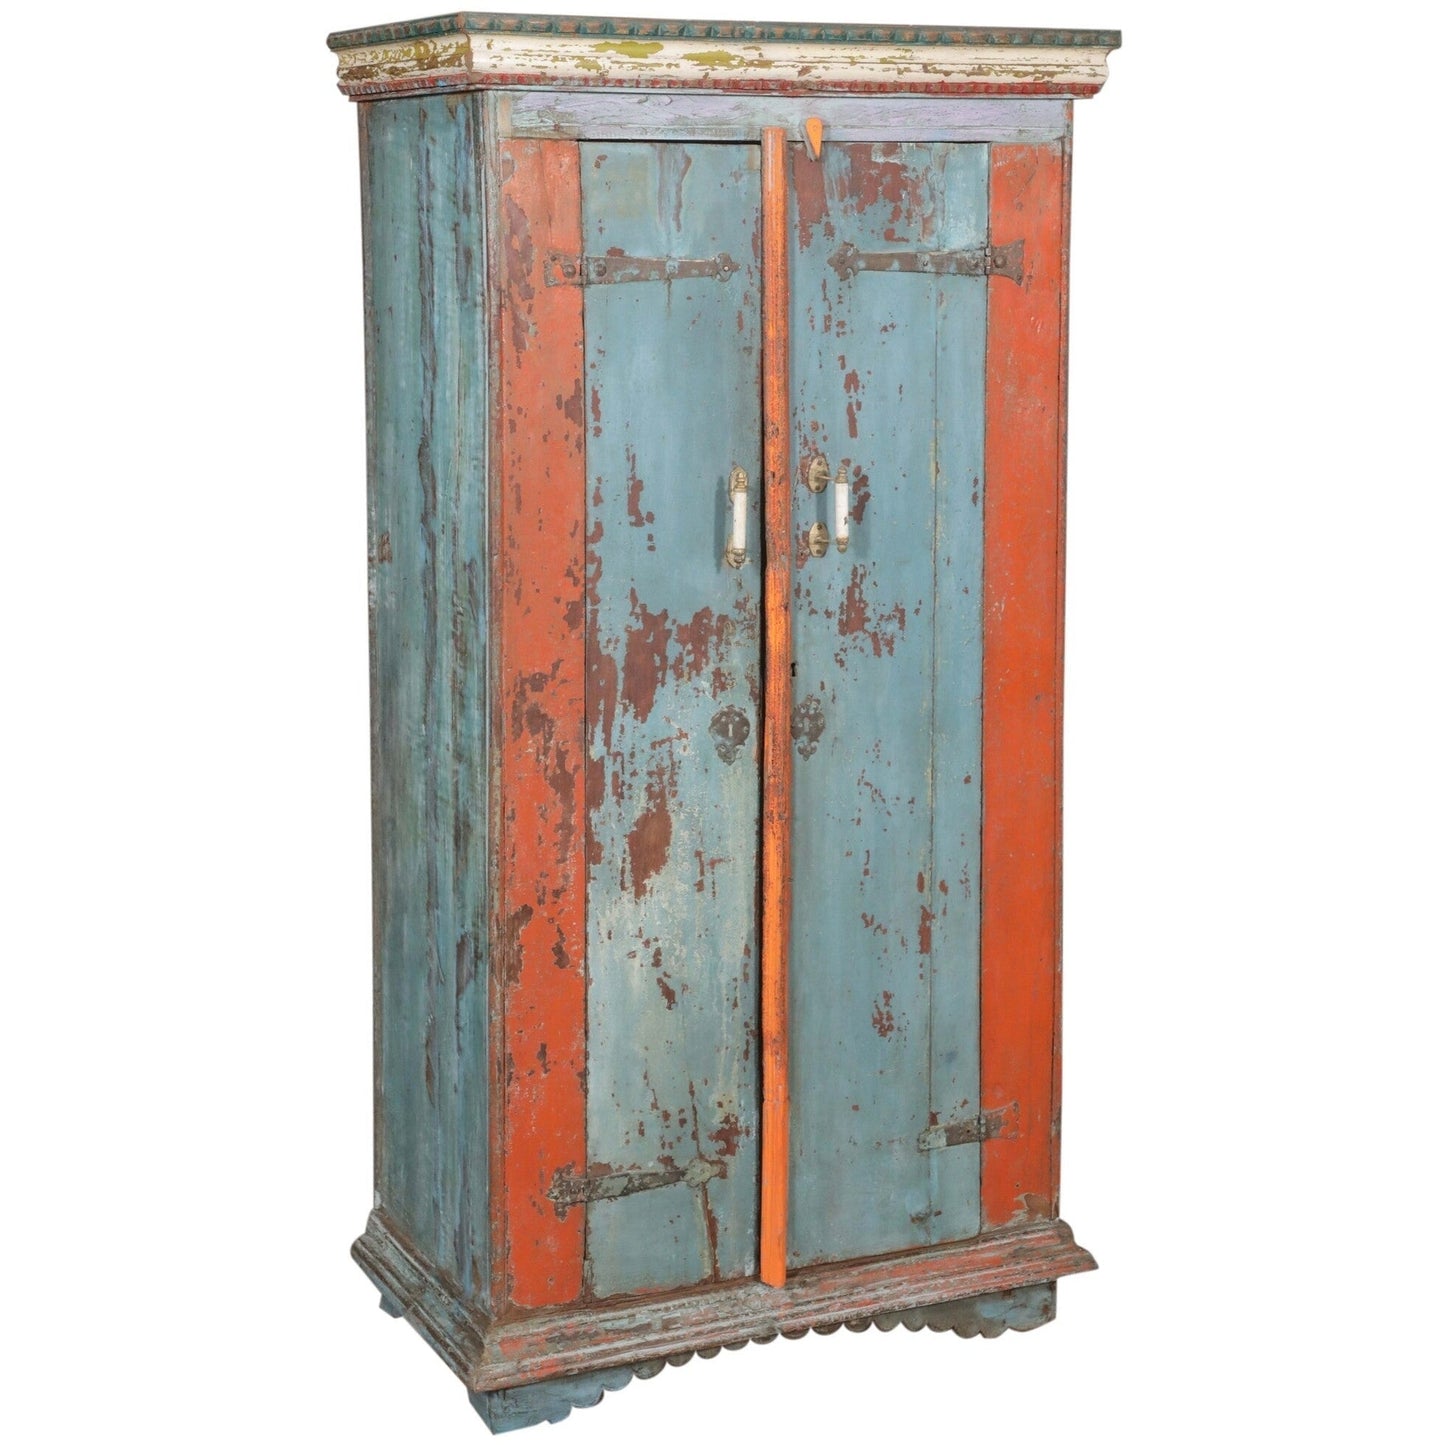 RM-062470, Wooden Cabinet